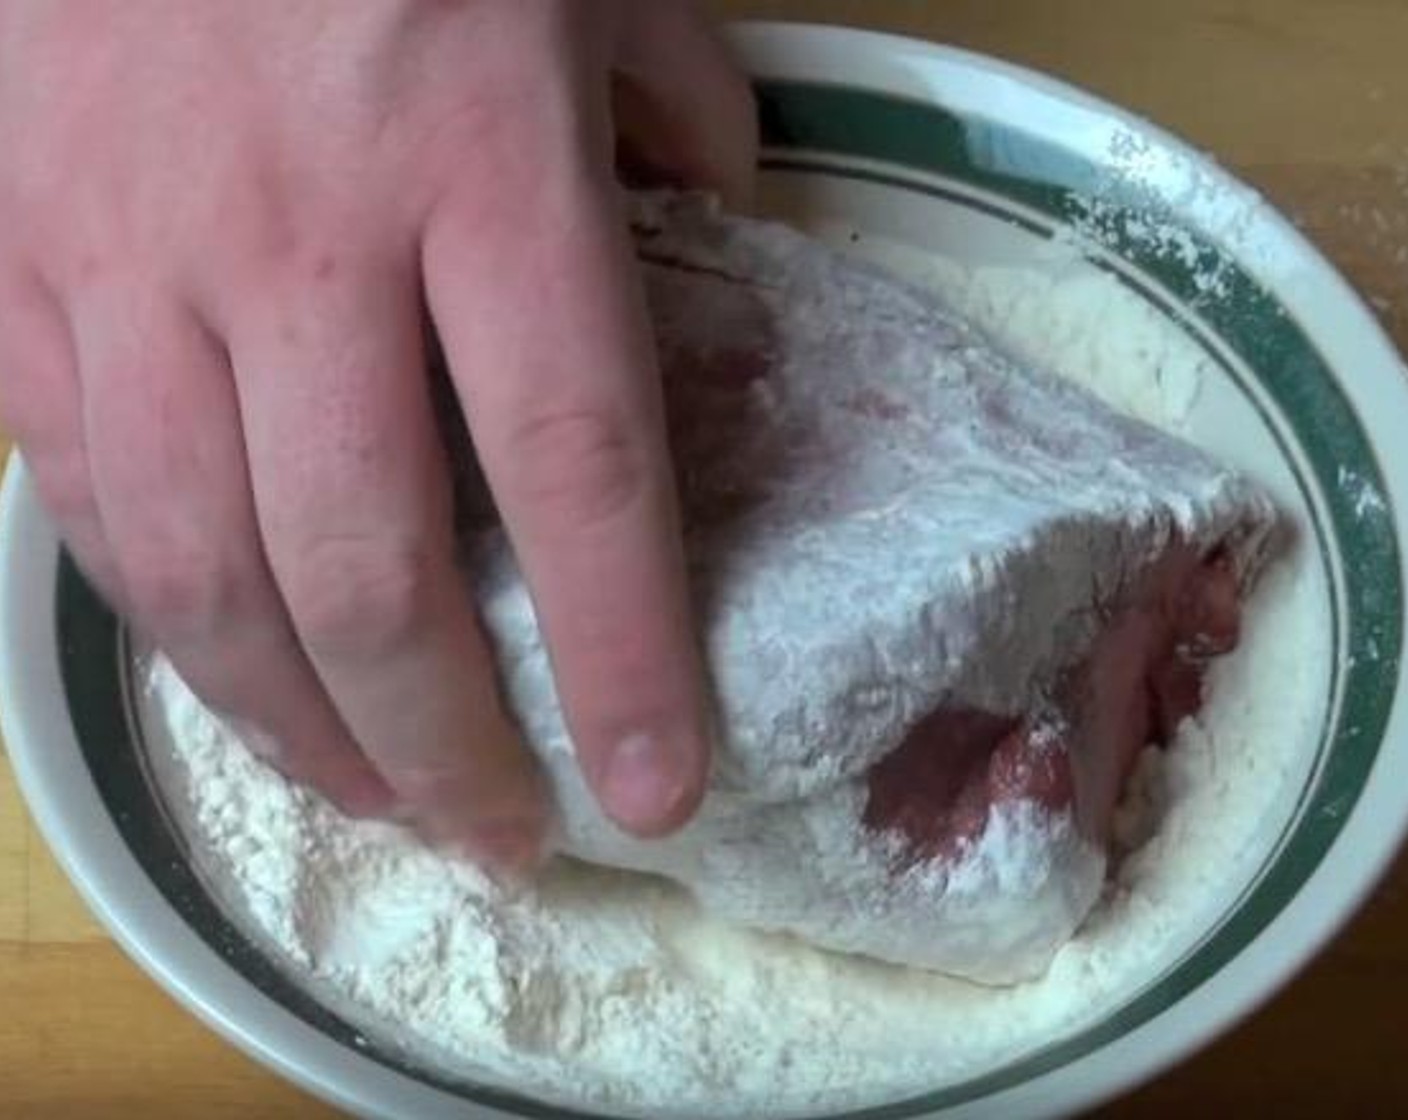 step 1 In a mixing bowl, add All-Purpose Flour (1 cup), Salt (to taste), and Ground Black Pepper (to taste). Mix together. Dredge the Beef Chuck (2.2 lb) in the flour mixture until there is a light coating over all sides.